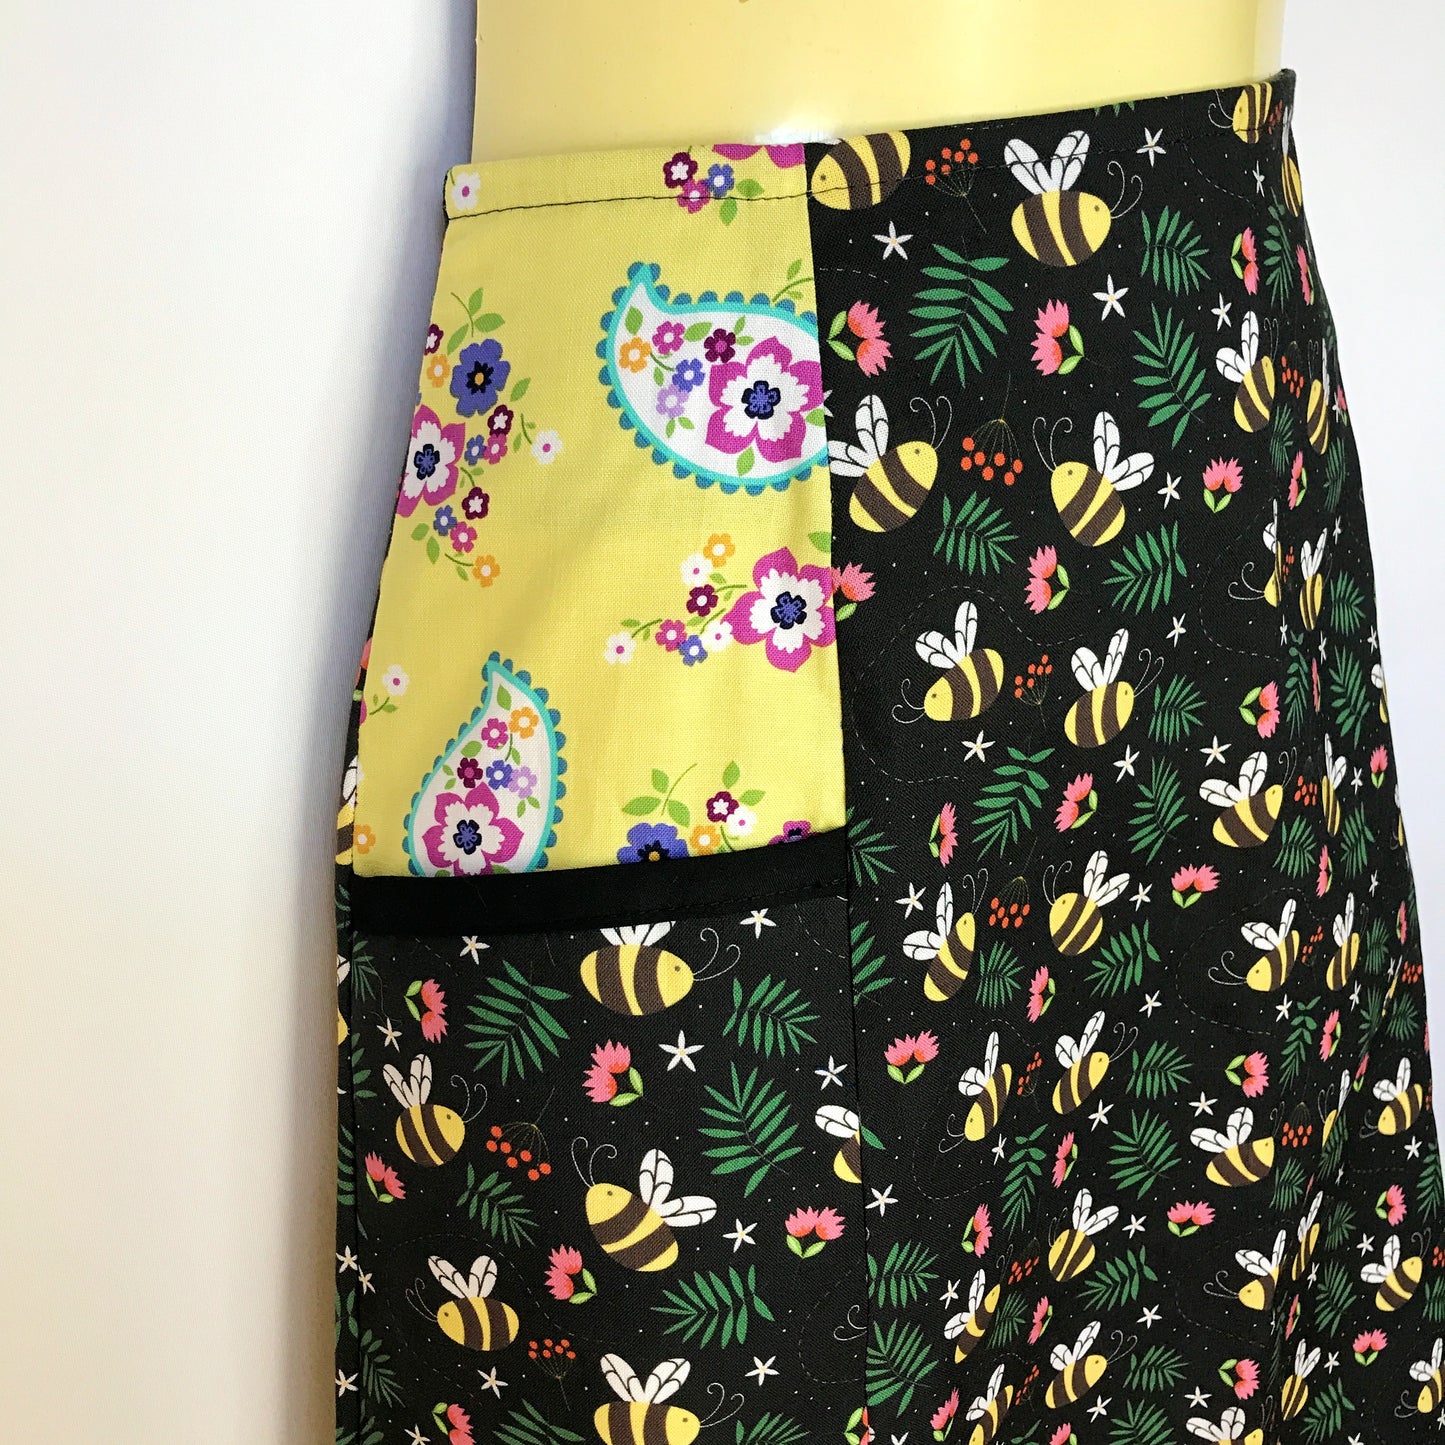 Ladies A Line Skirt - Bumble bees - sizes 8 - 18